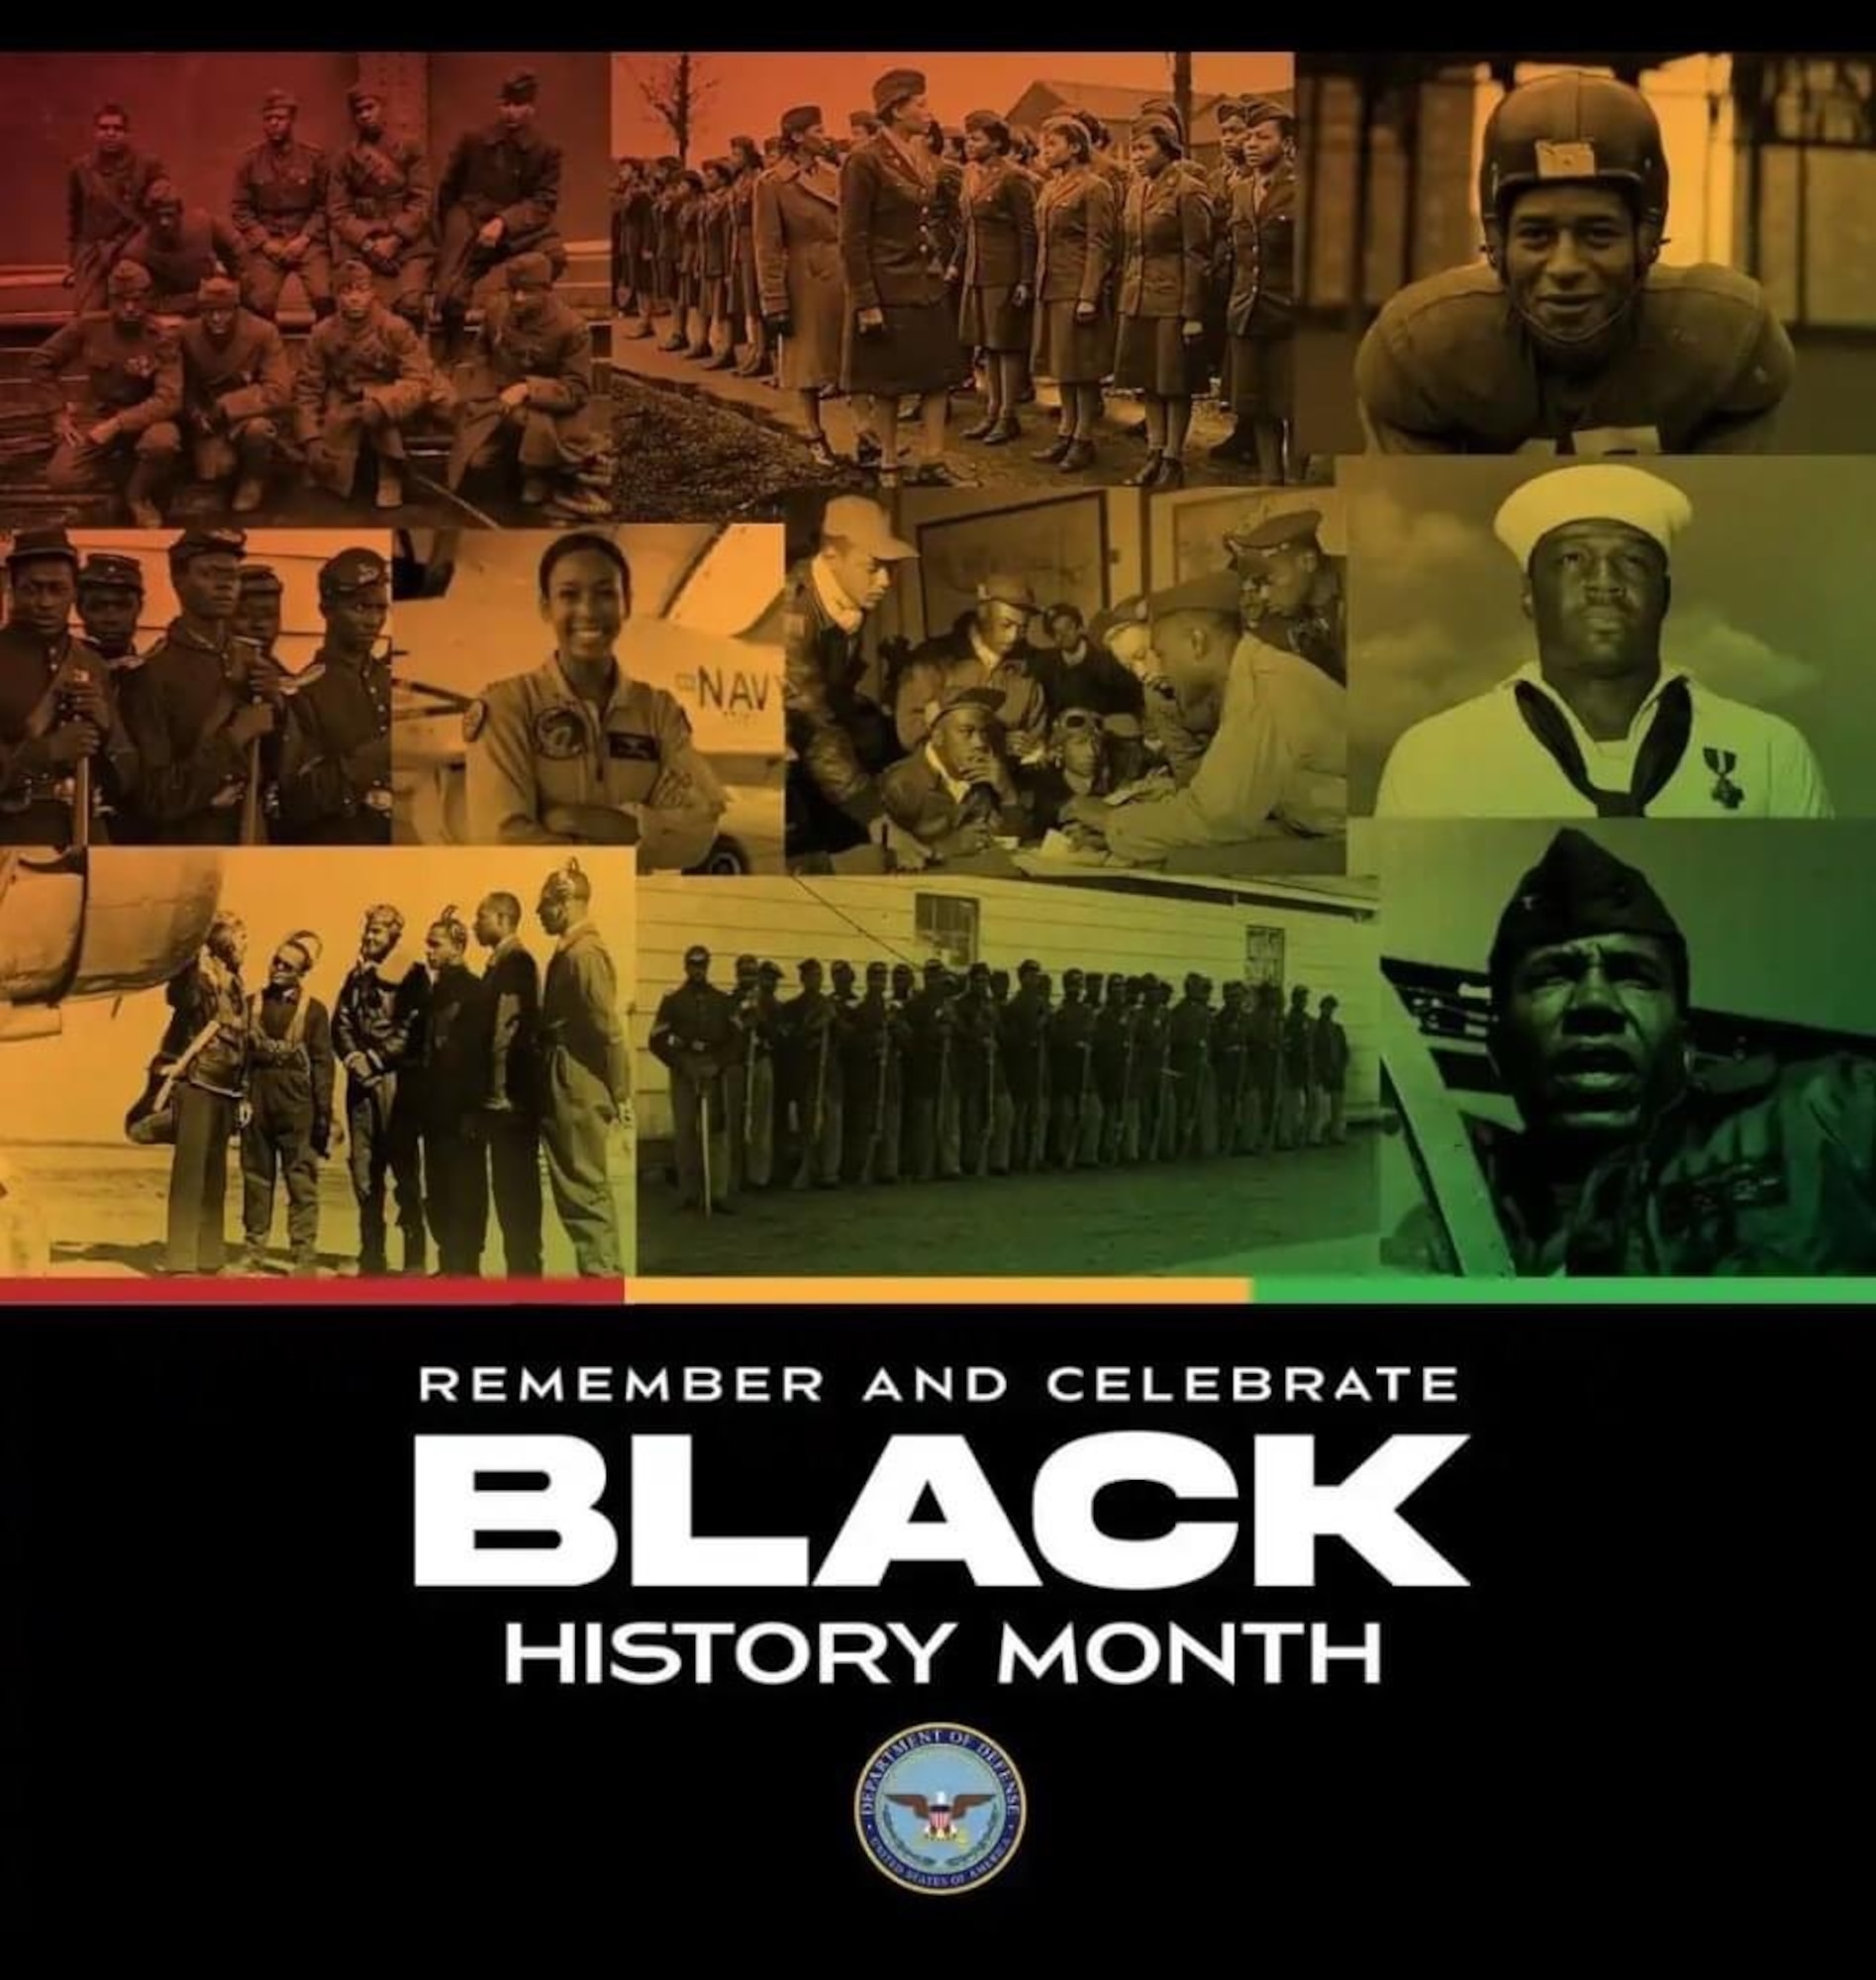 The Department of Defense recognizes the bravery and exceptional service of Black military and civilian personnel. This month and throughout the year, we celebrate the richness and diversity of their achievements. (Graphic by the Department of Defense)